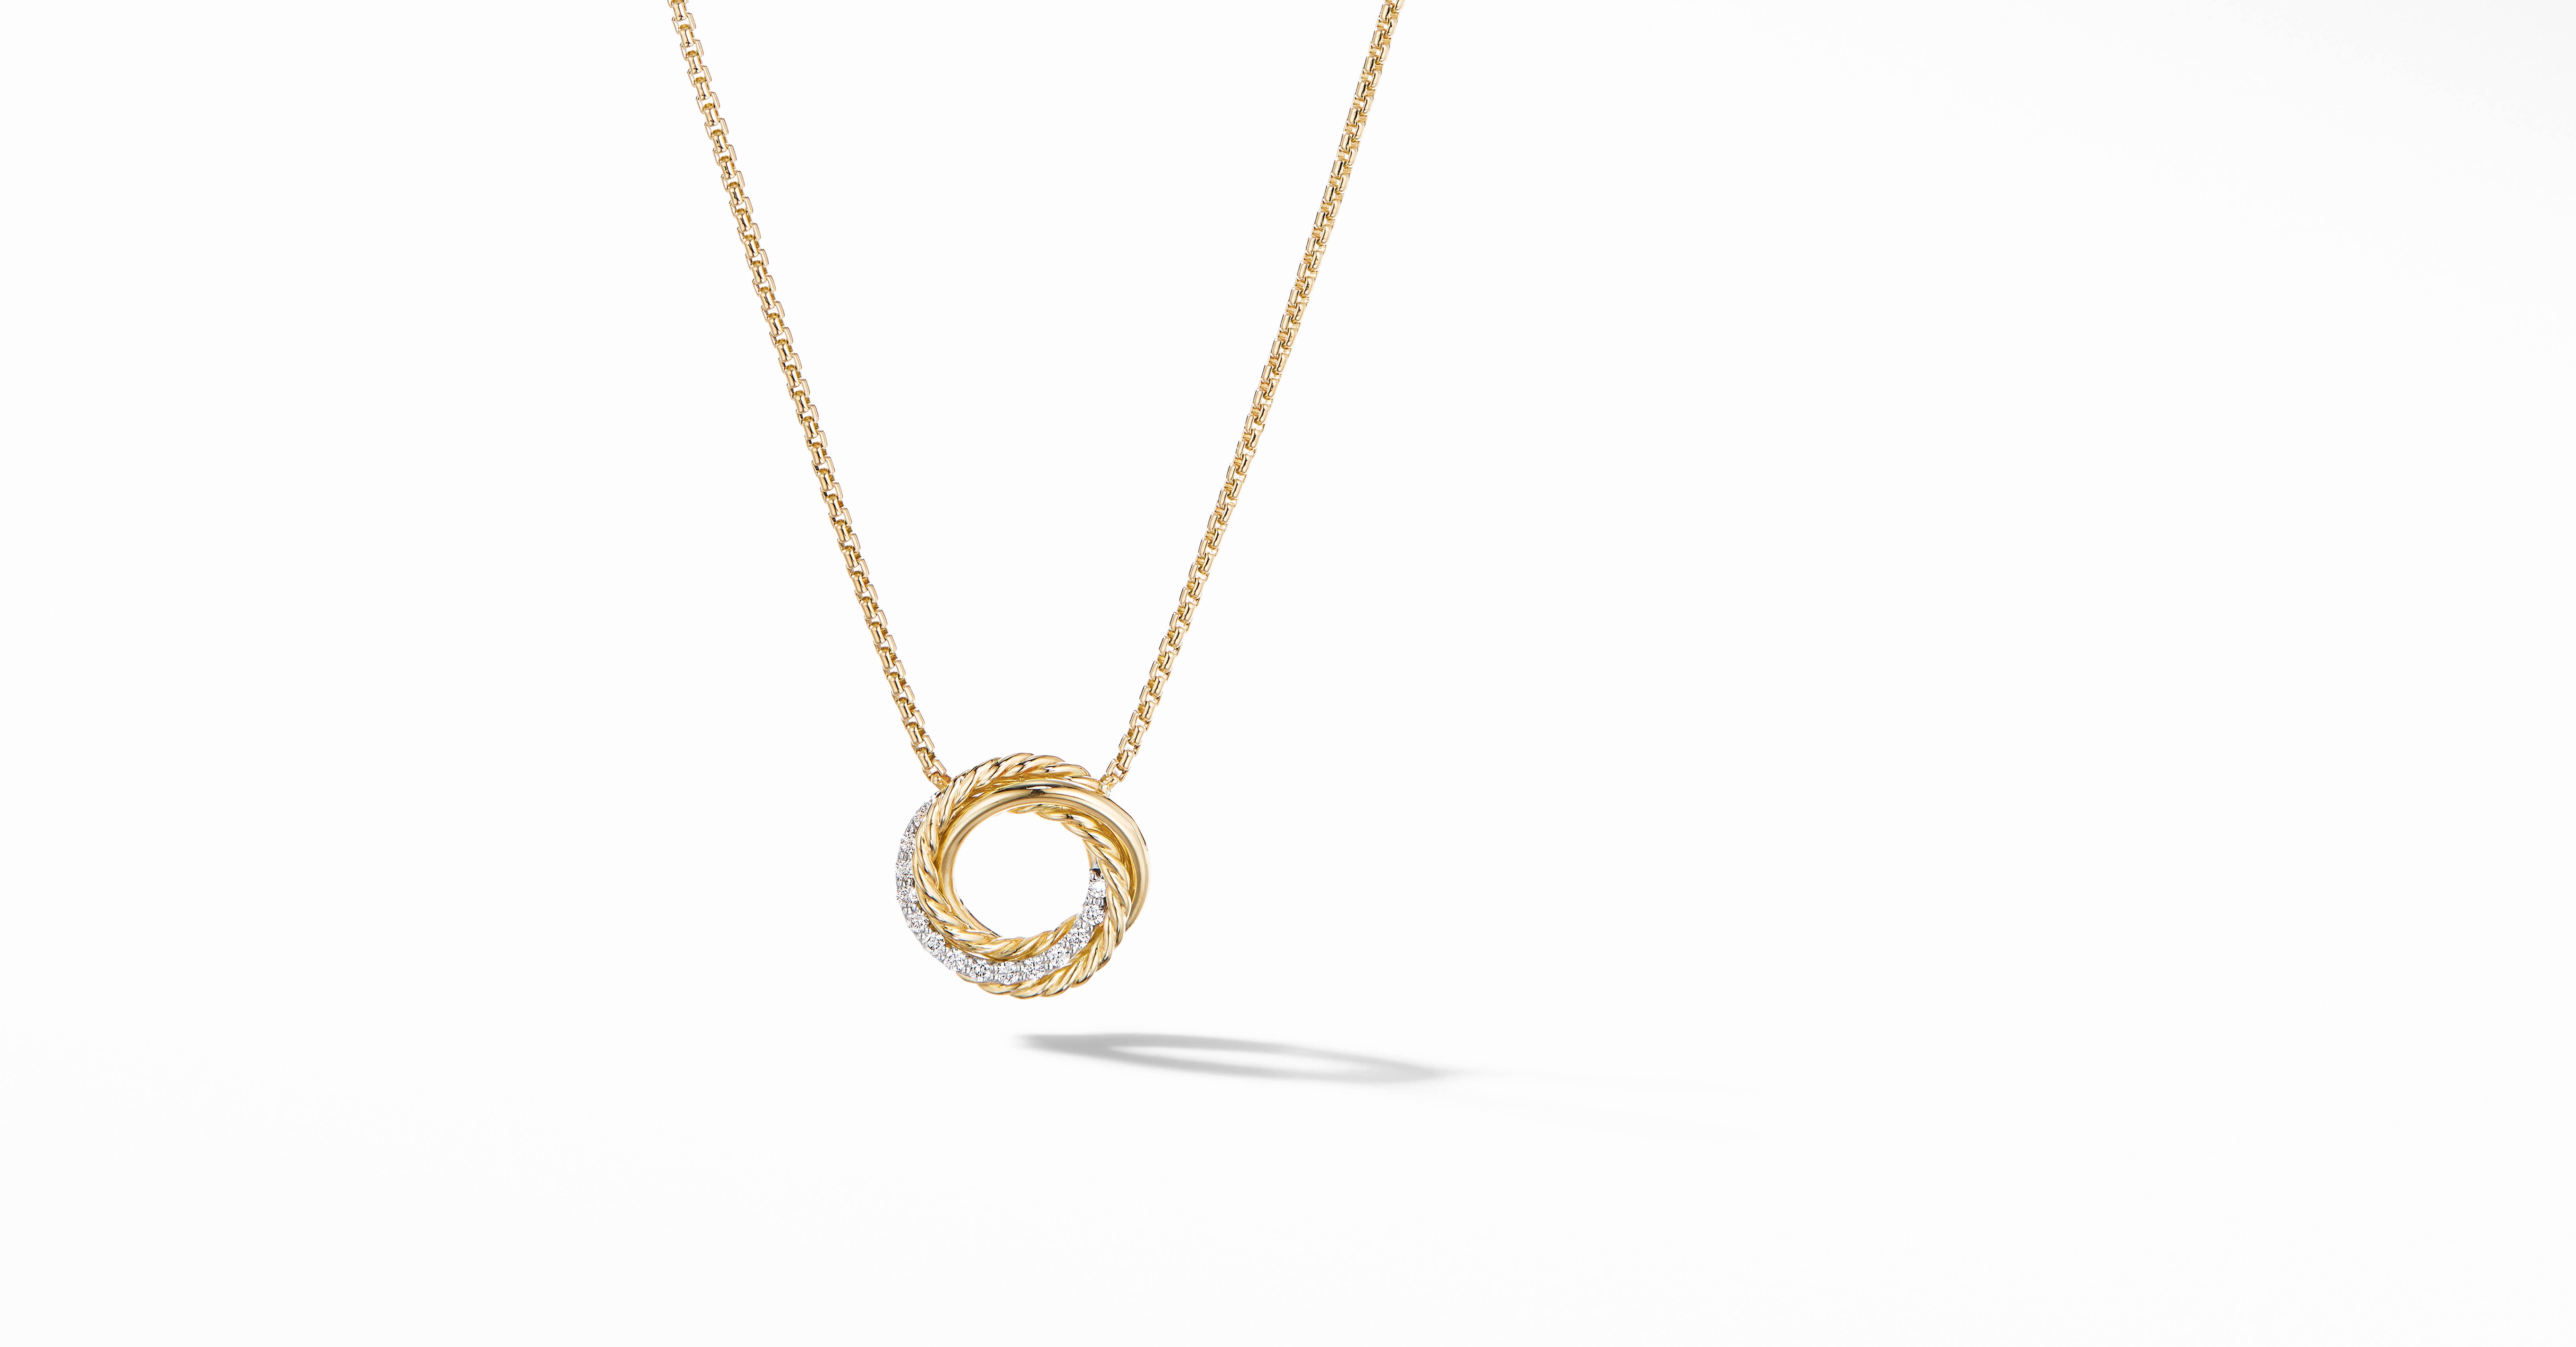 Crossover Pendant Necklace in 18K Yellow Gold with Pavé Diamonds